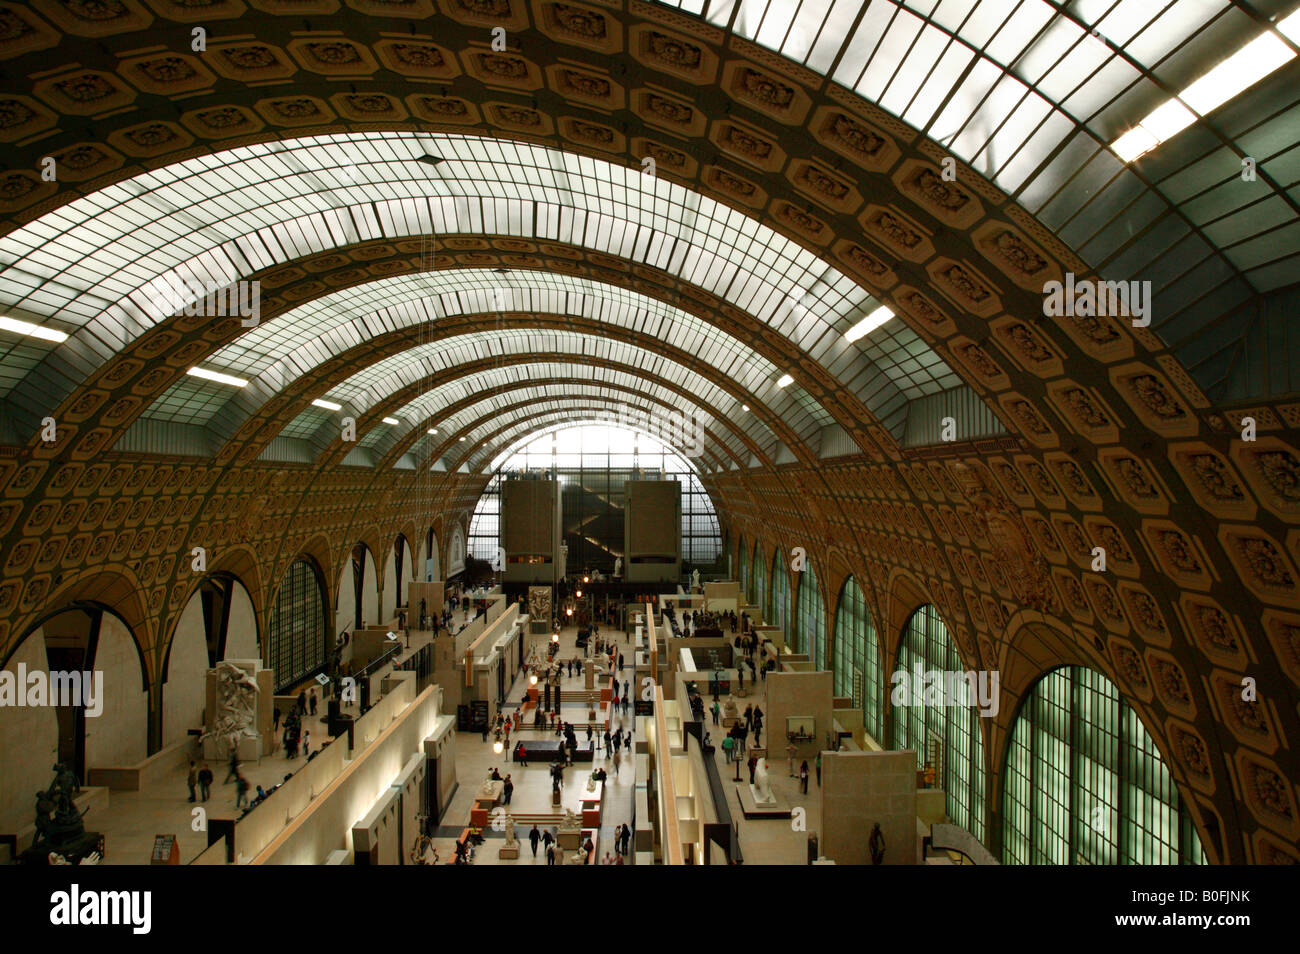 Shot looking down the main hall of the Musée d'Orsay, Paris France Stock Photo